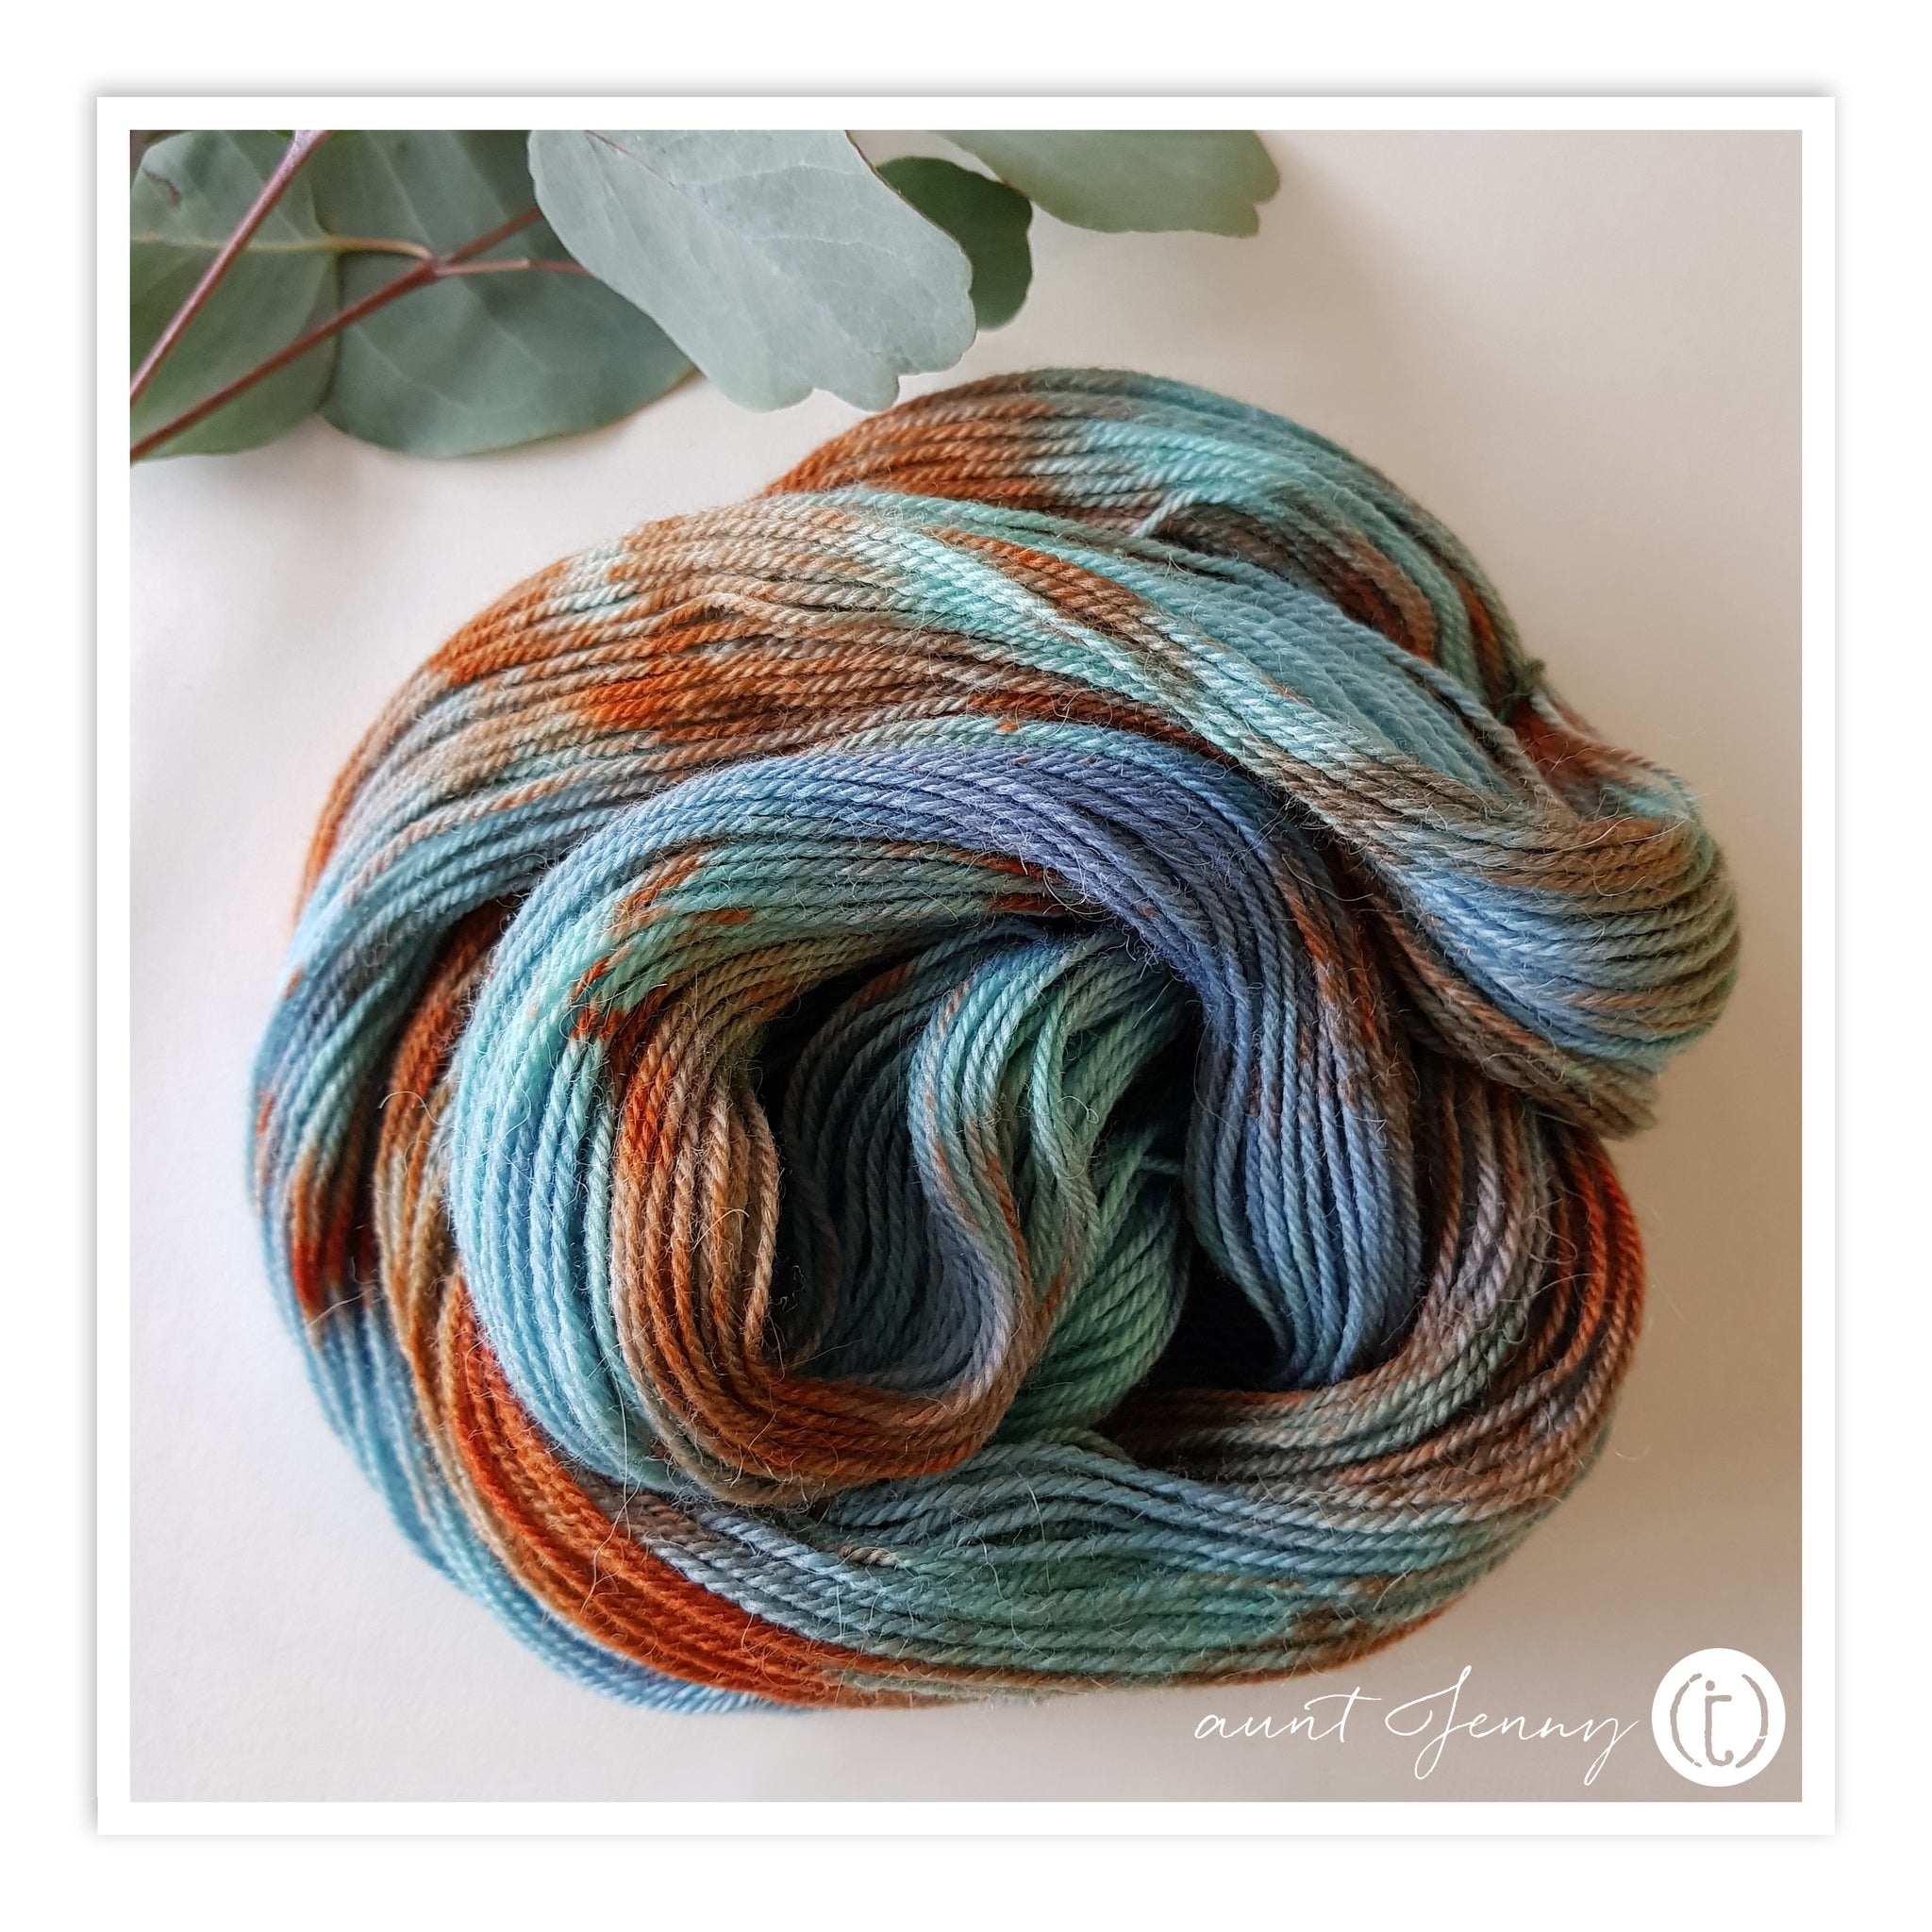 Naturally Dyed Speckled Yarn Tutorial